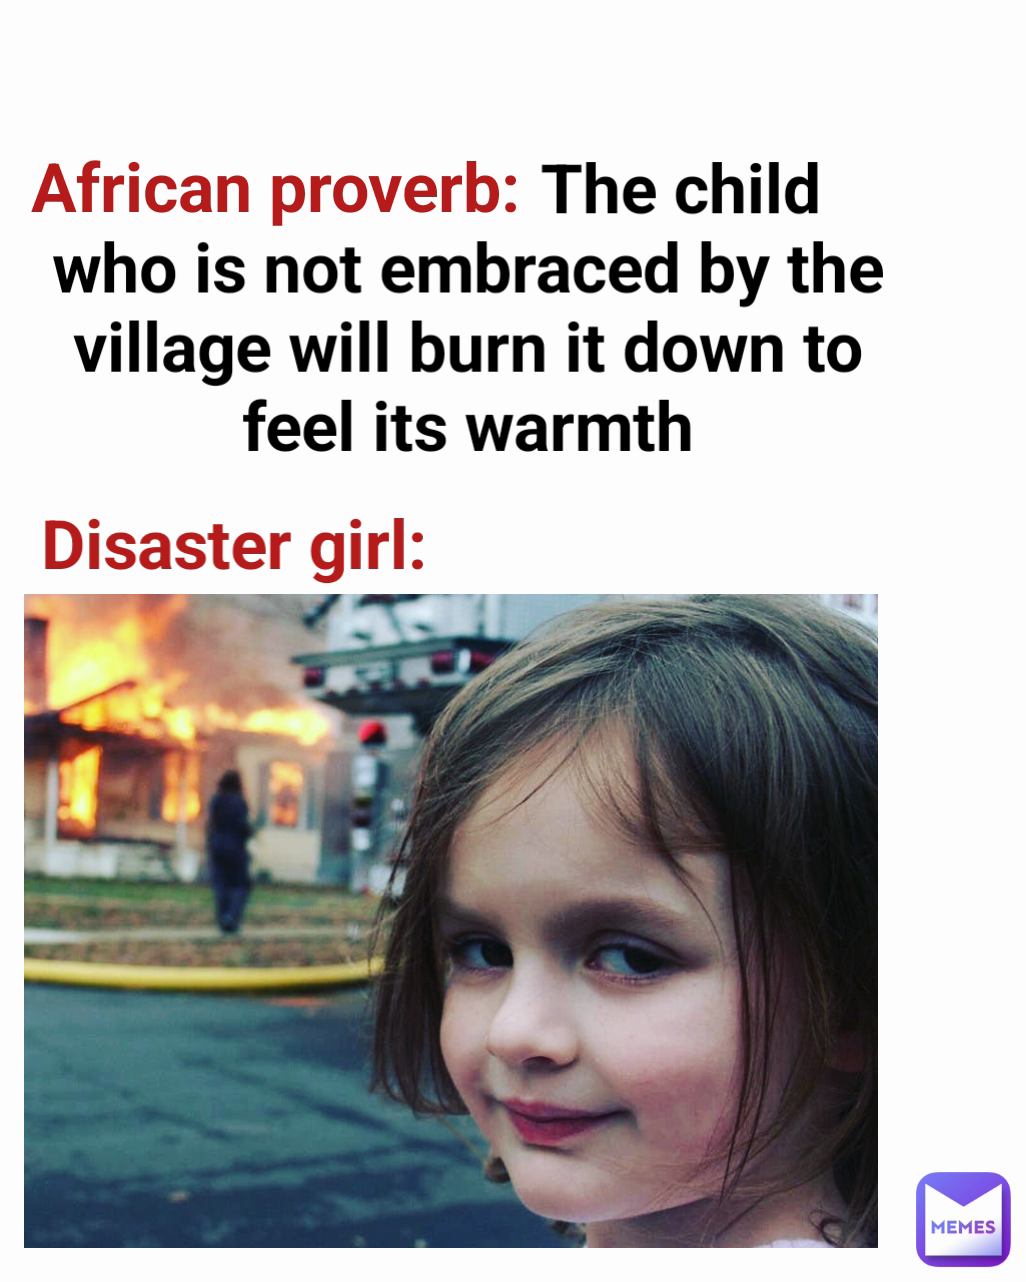 Disaster girl: African proverb:                          The child who is not embraced by the village will burn it down to feel its warmth